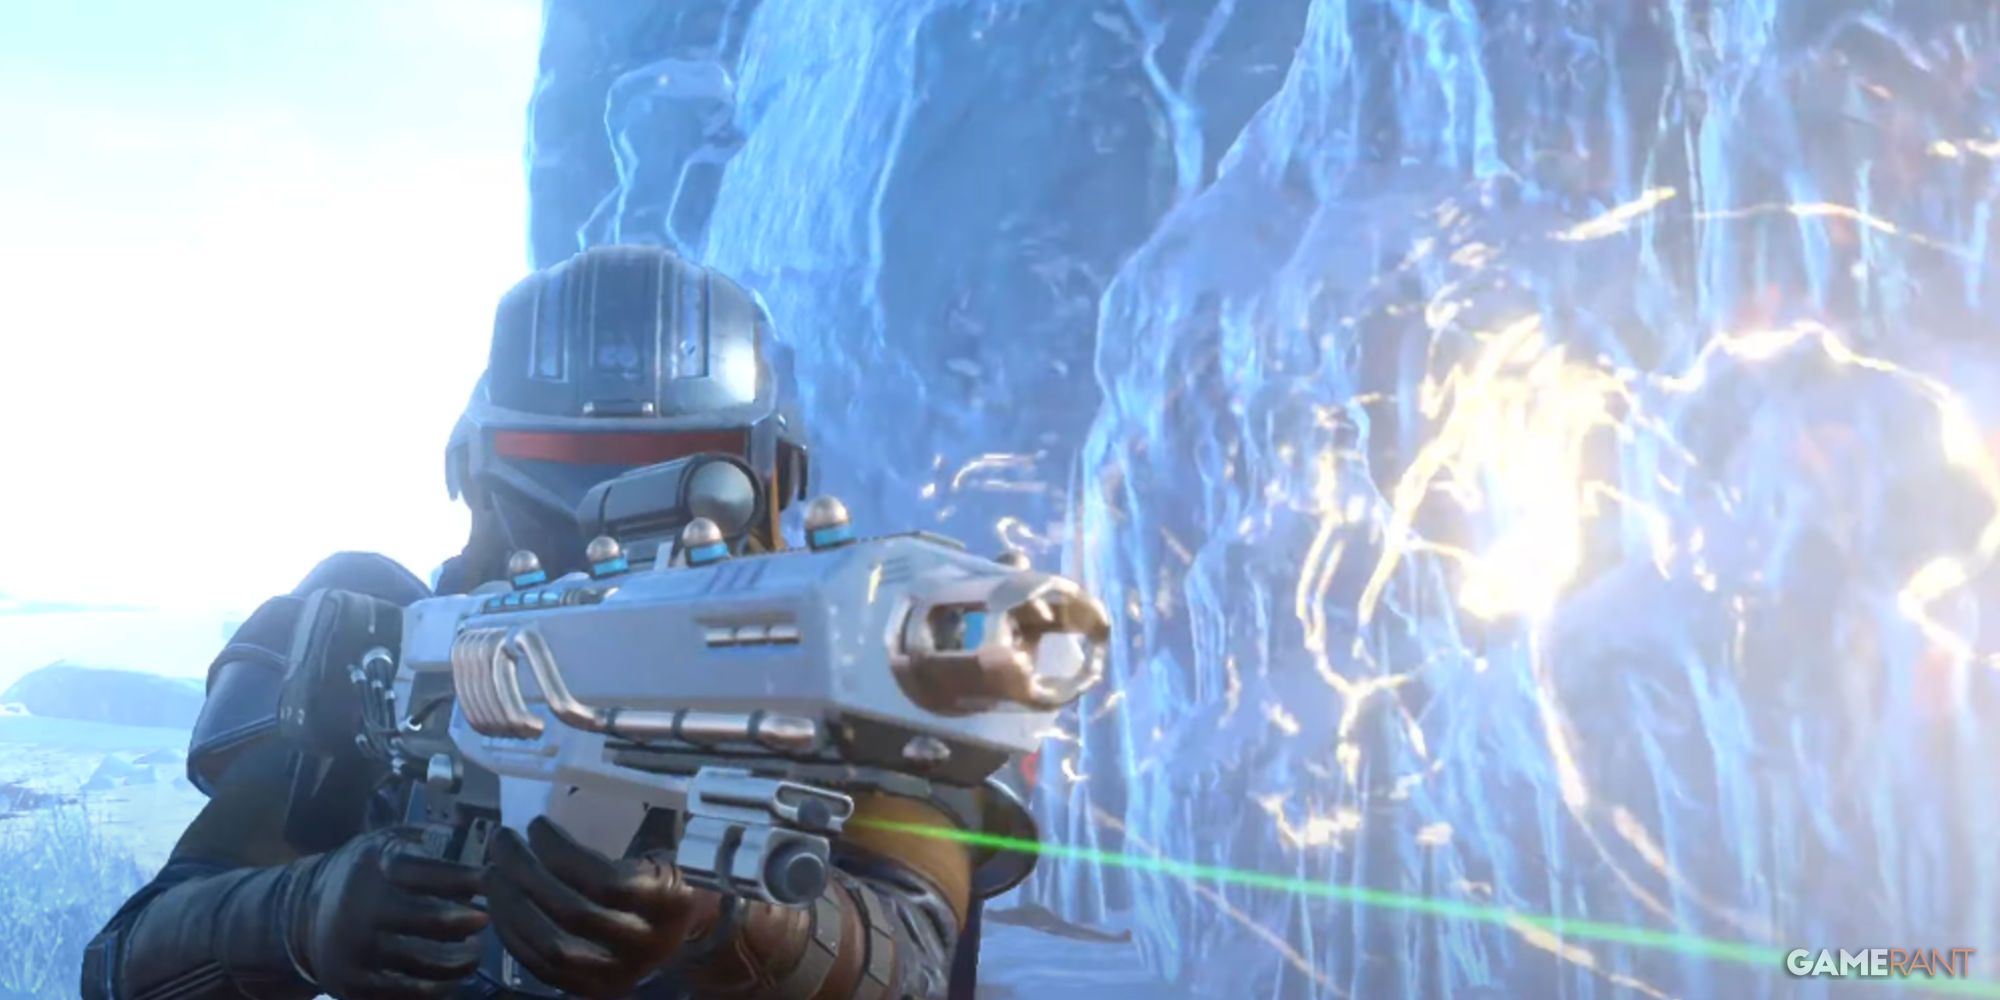 3rd person view of the Purifier being fired on an icy planet